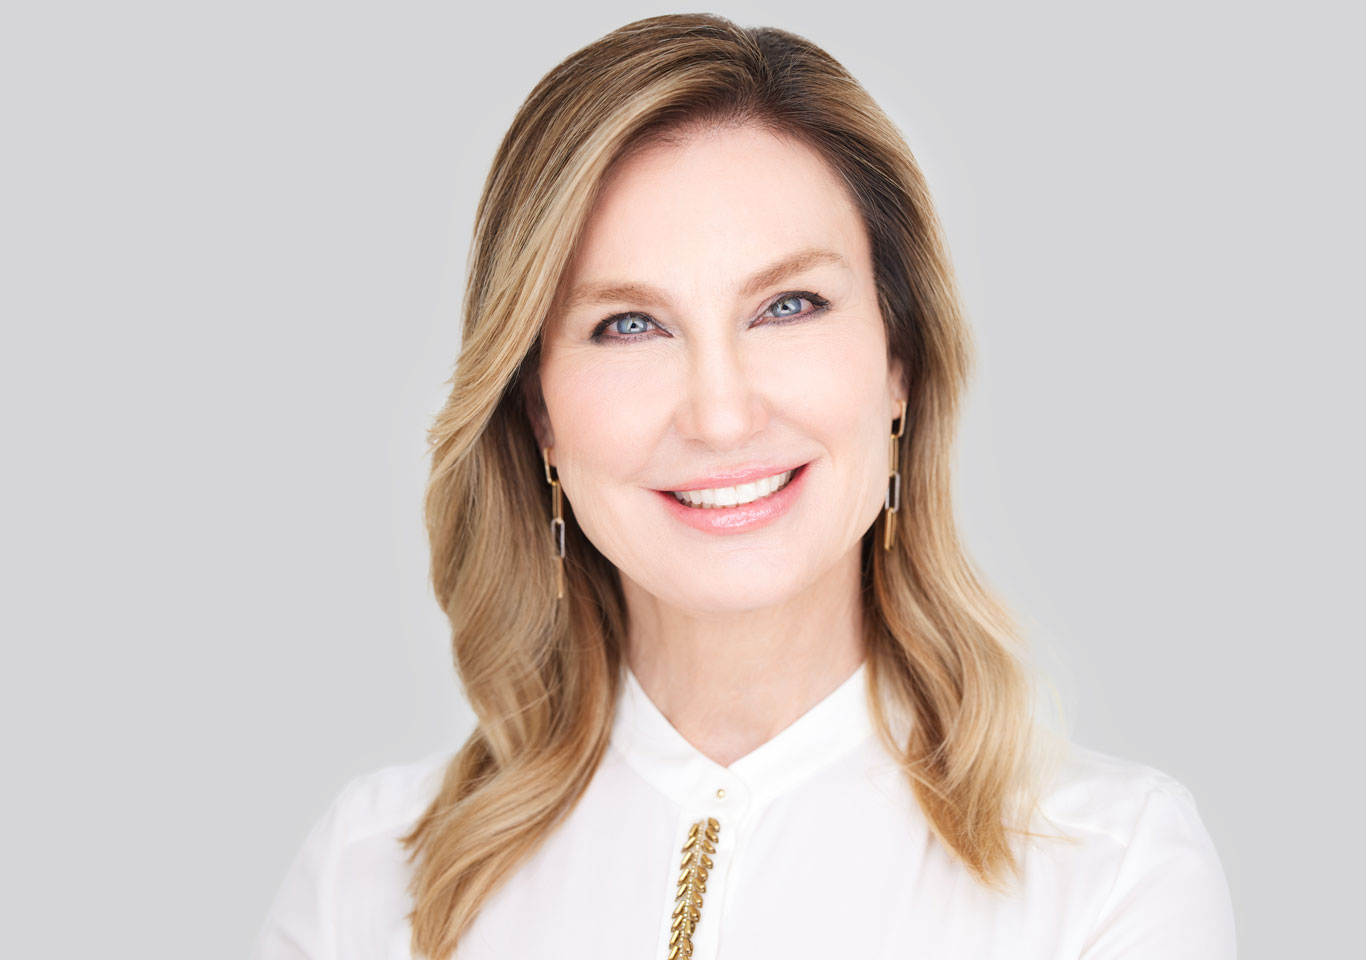 Dr. Sue Ellen Cox, founder of Aesthetic Solutions in Chapel Hill, NC is a pioneering thought-leader in aesthetic medicine and internationally recognized for her expertise in cosmetic dermatology